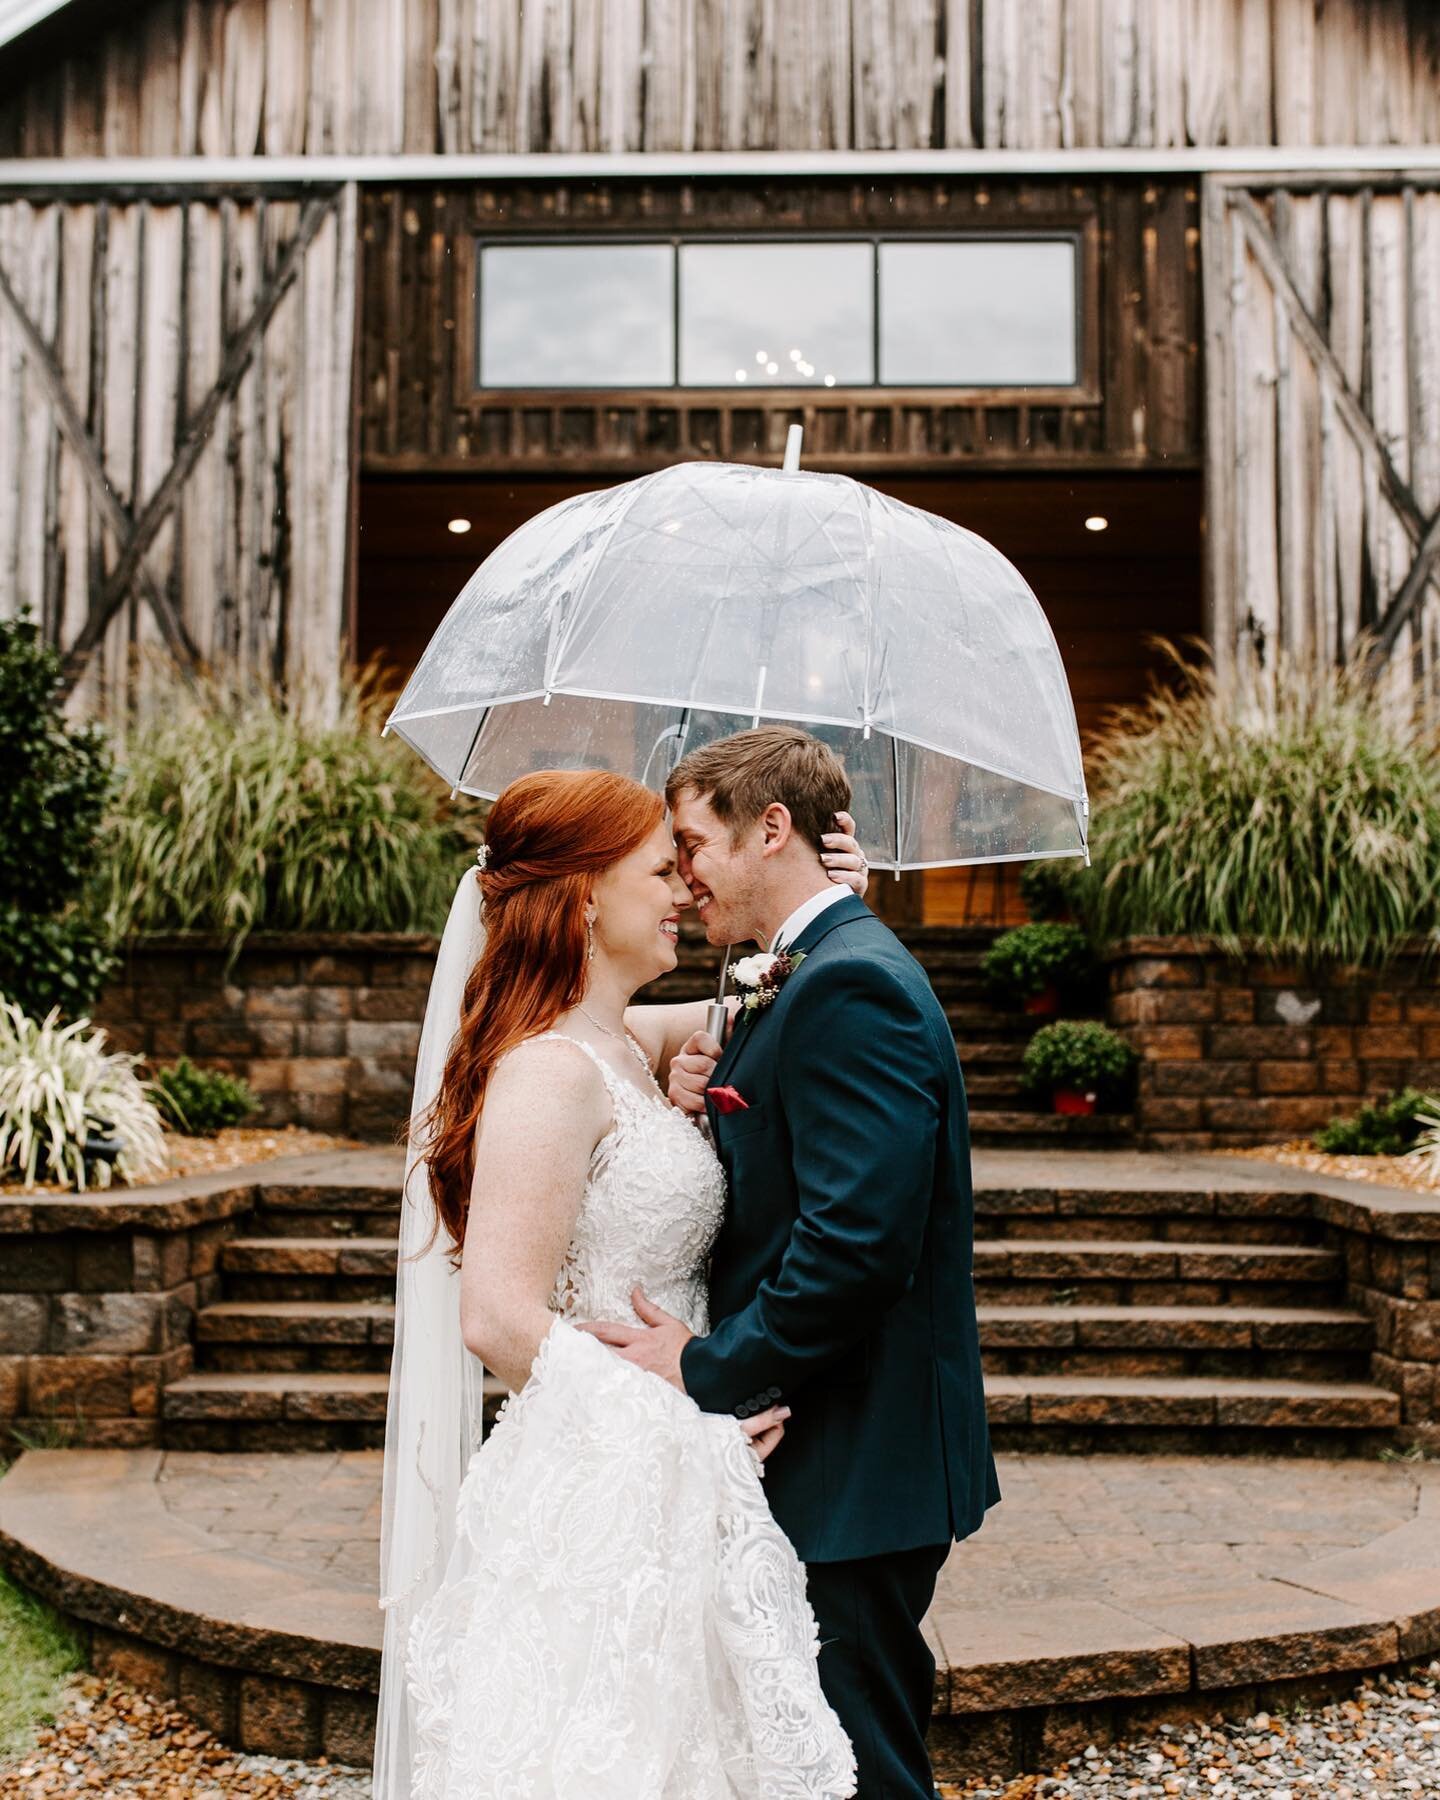 These two didn't let a little rain stop them from enjoying their day! Stay tuned for the Wingo Wedding at @kmbarnlewisfarm !

www.lovejulesphotography.com